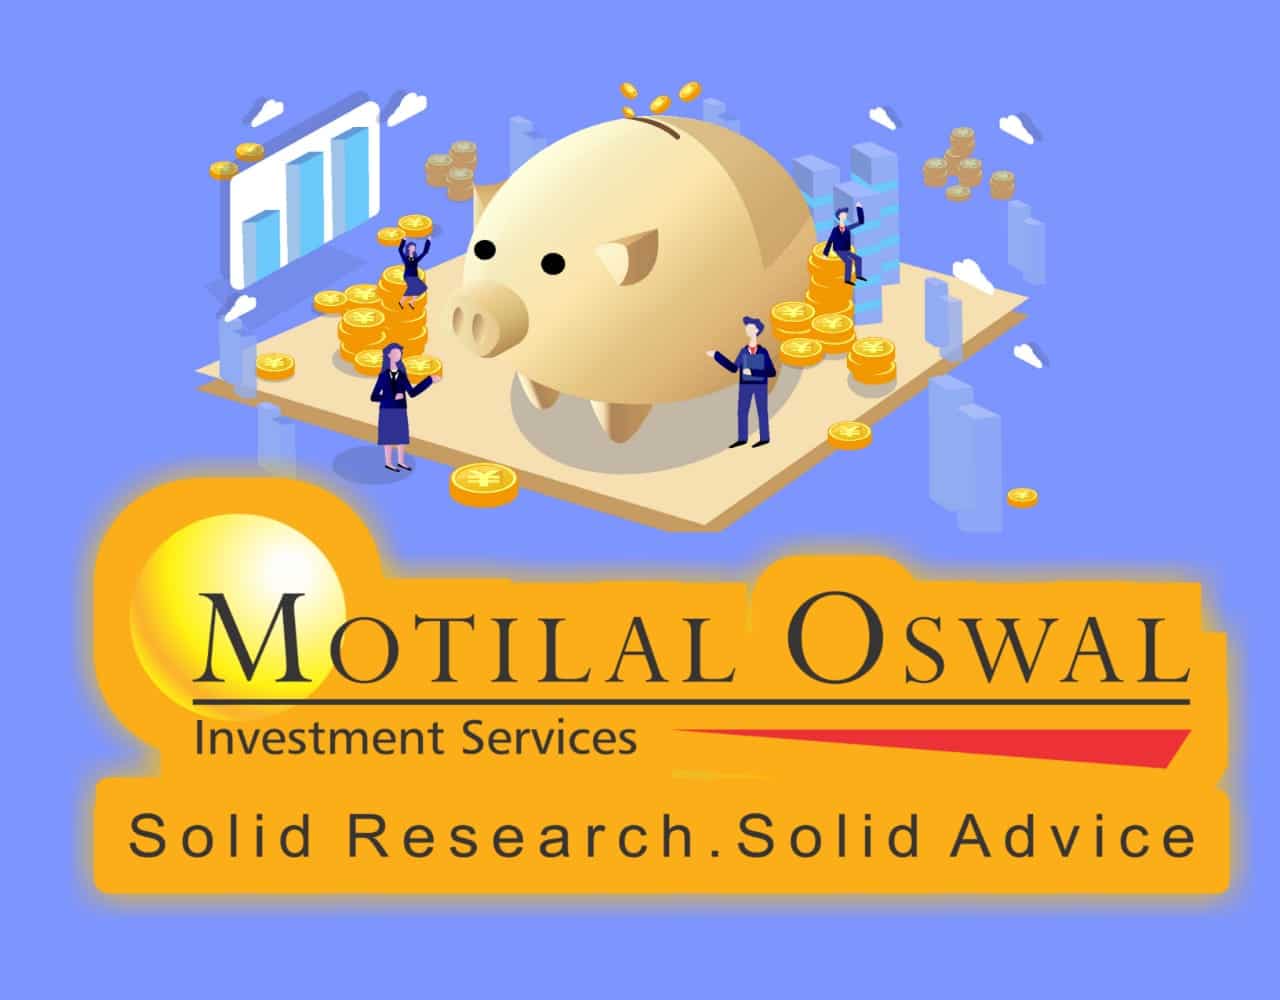 Motilal oswal review